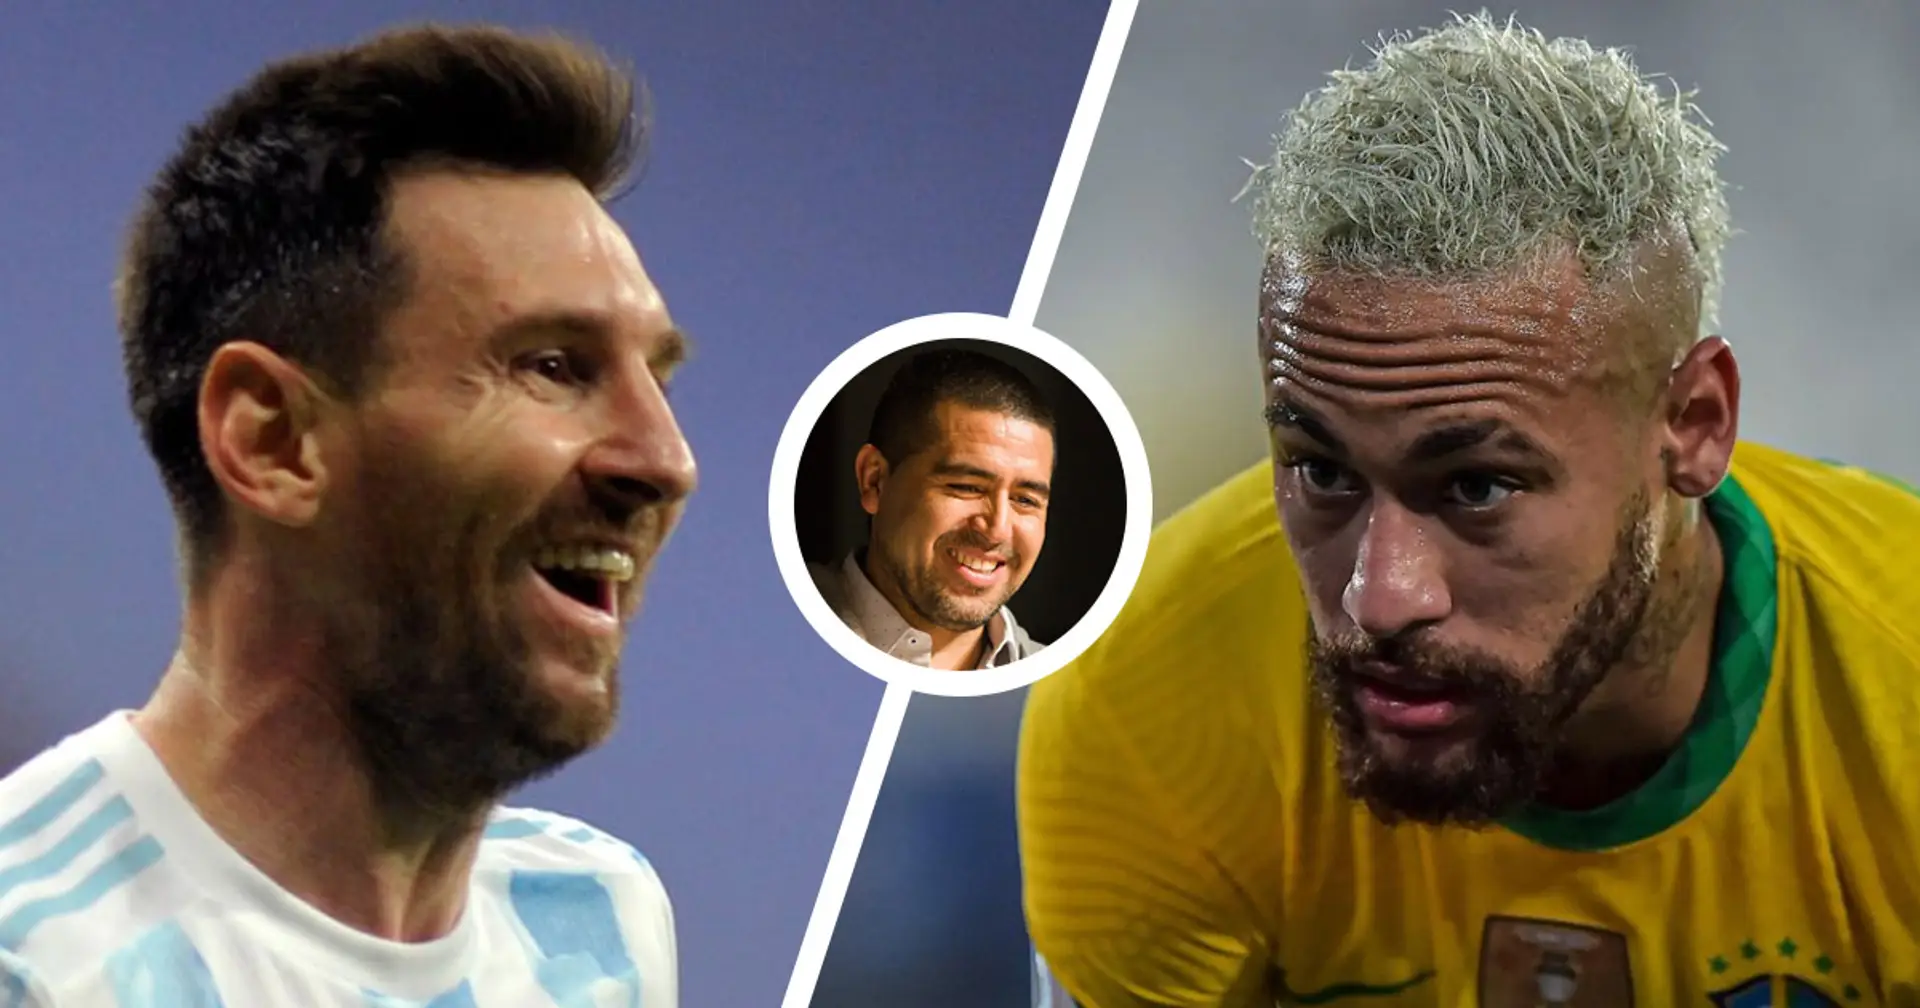 'Neymar is a genius but as long as Messi is on the pitch, Argentina is the favourite to win the Copa America': Riquelme